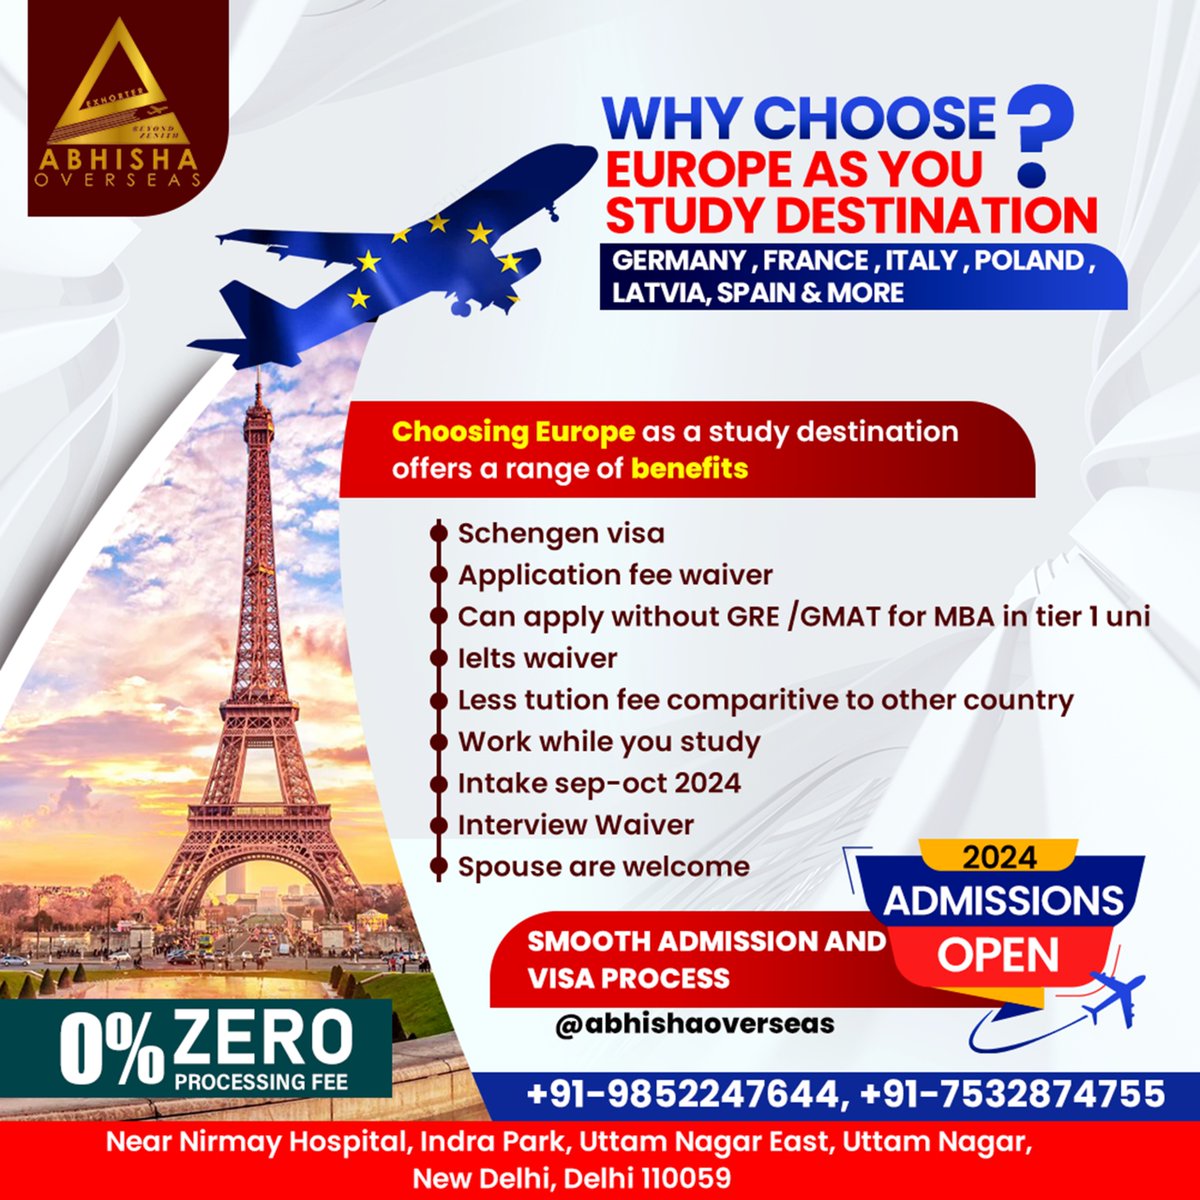 🌍 WHY CHOOSE EUROPE AS YOUR STUDY DESTINATION? 🌍

Study in Germany, France, Italy, Poland, Latvia, Spain & more with Abhisha Overseas! Choosing Europe offers a range of benefits:

Contact Abhisha Overseas: 📞 +91-9852247644, +91-7532874755 
#StudyInEurope #EuropeanEducation